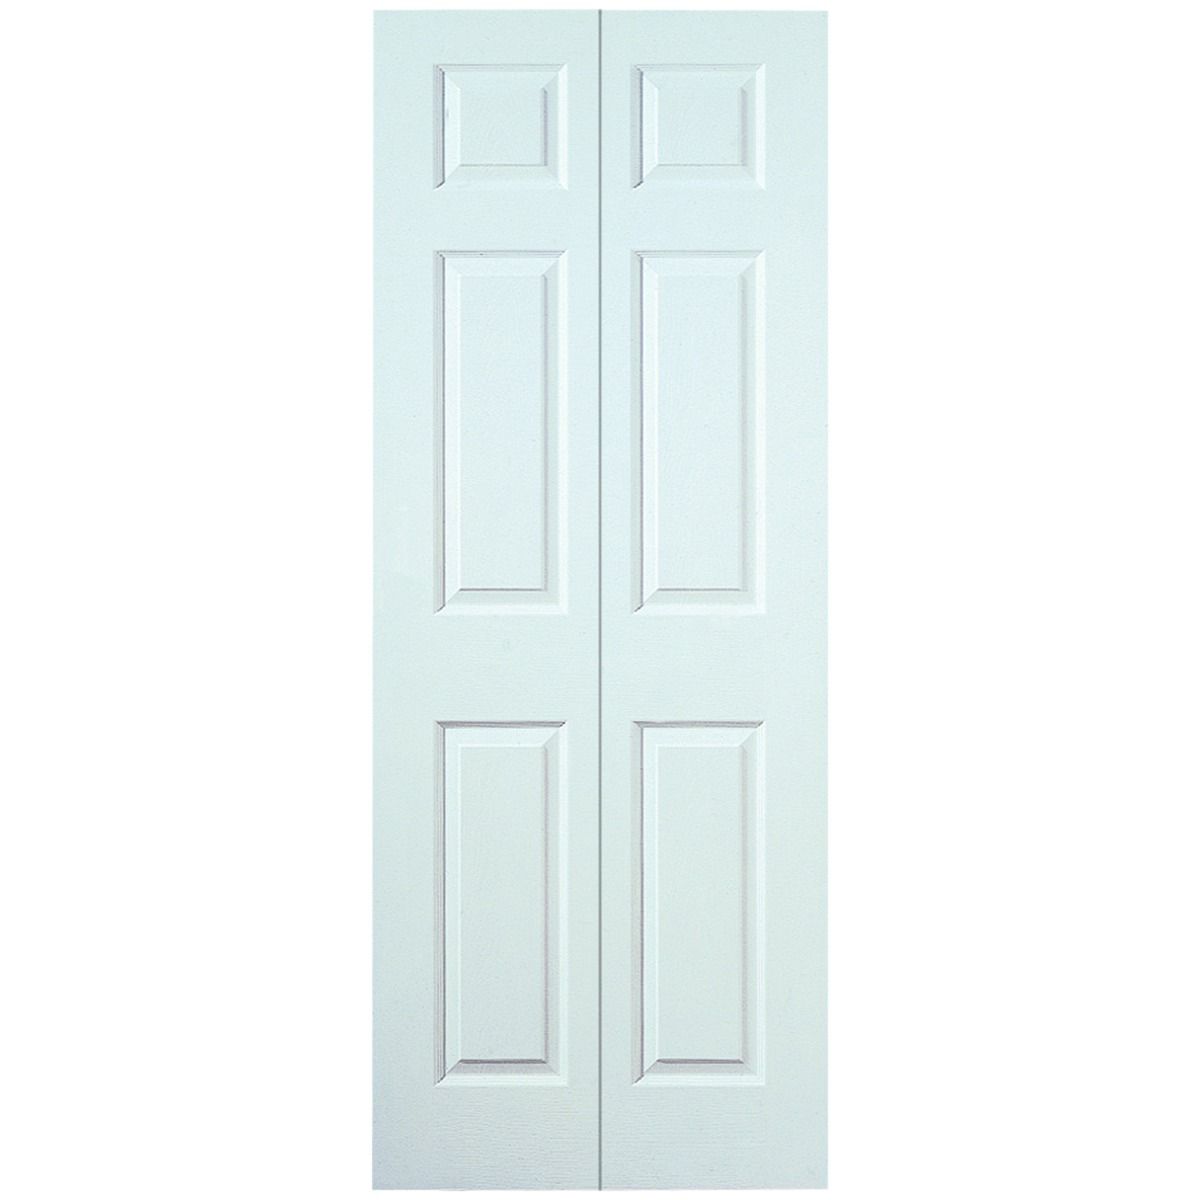 Image of Wickes Lincoln White Grained Moulded 6 Panel Internal Bi-Fold Door - 1981 x 762mm